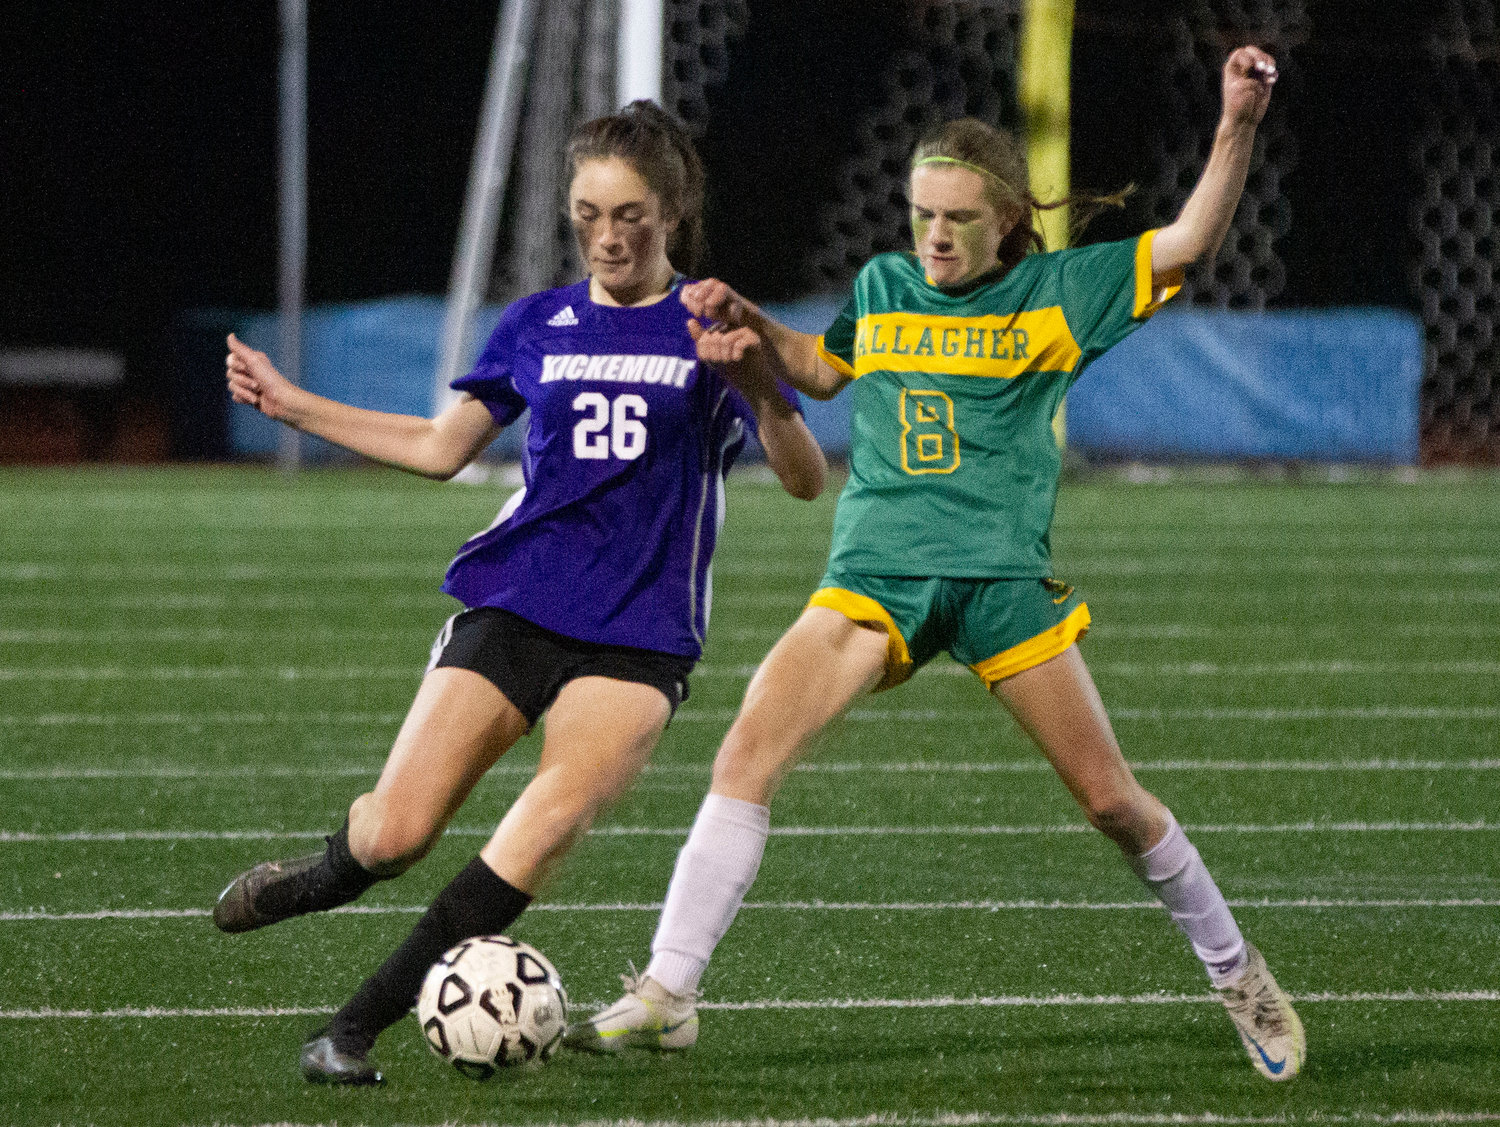 Vivienne Noonan fights for a throw in.